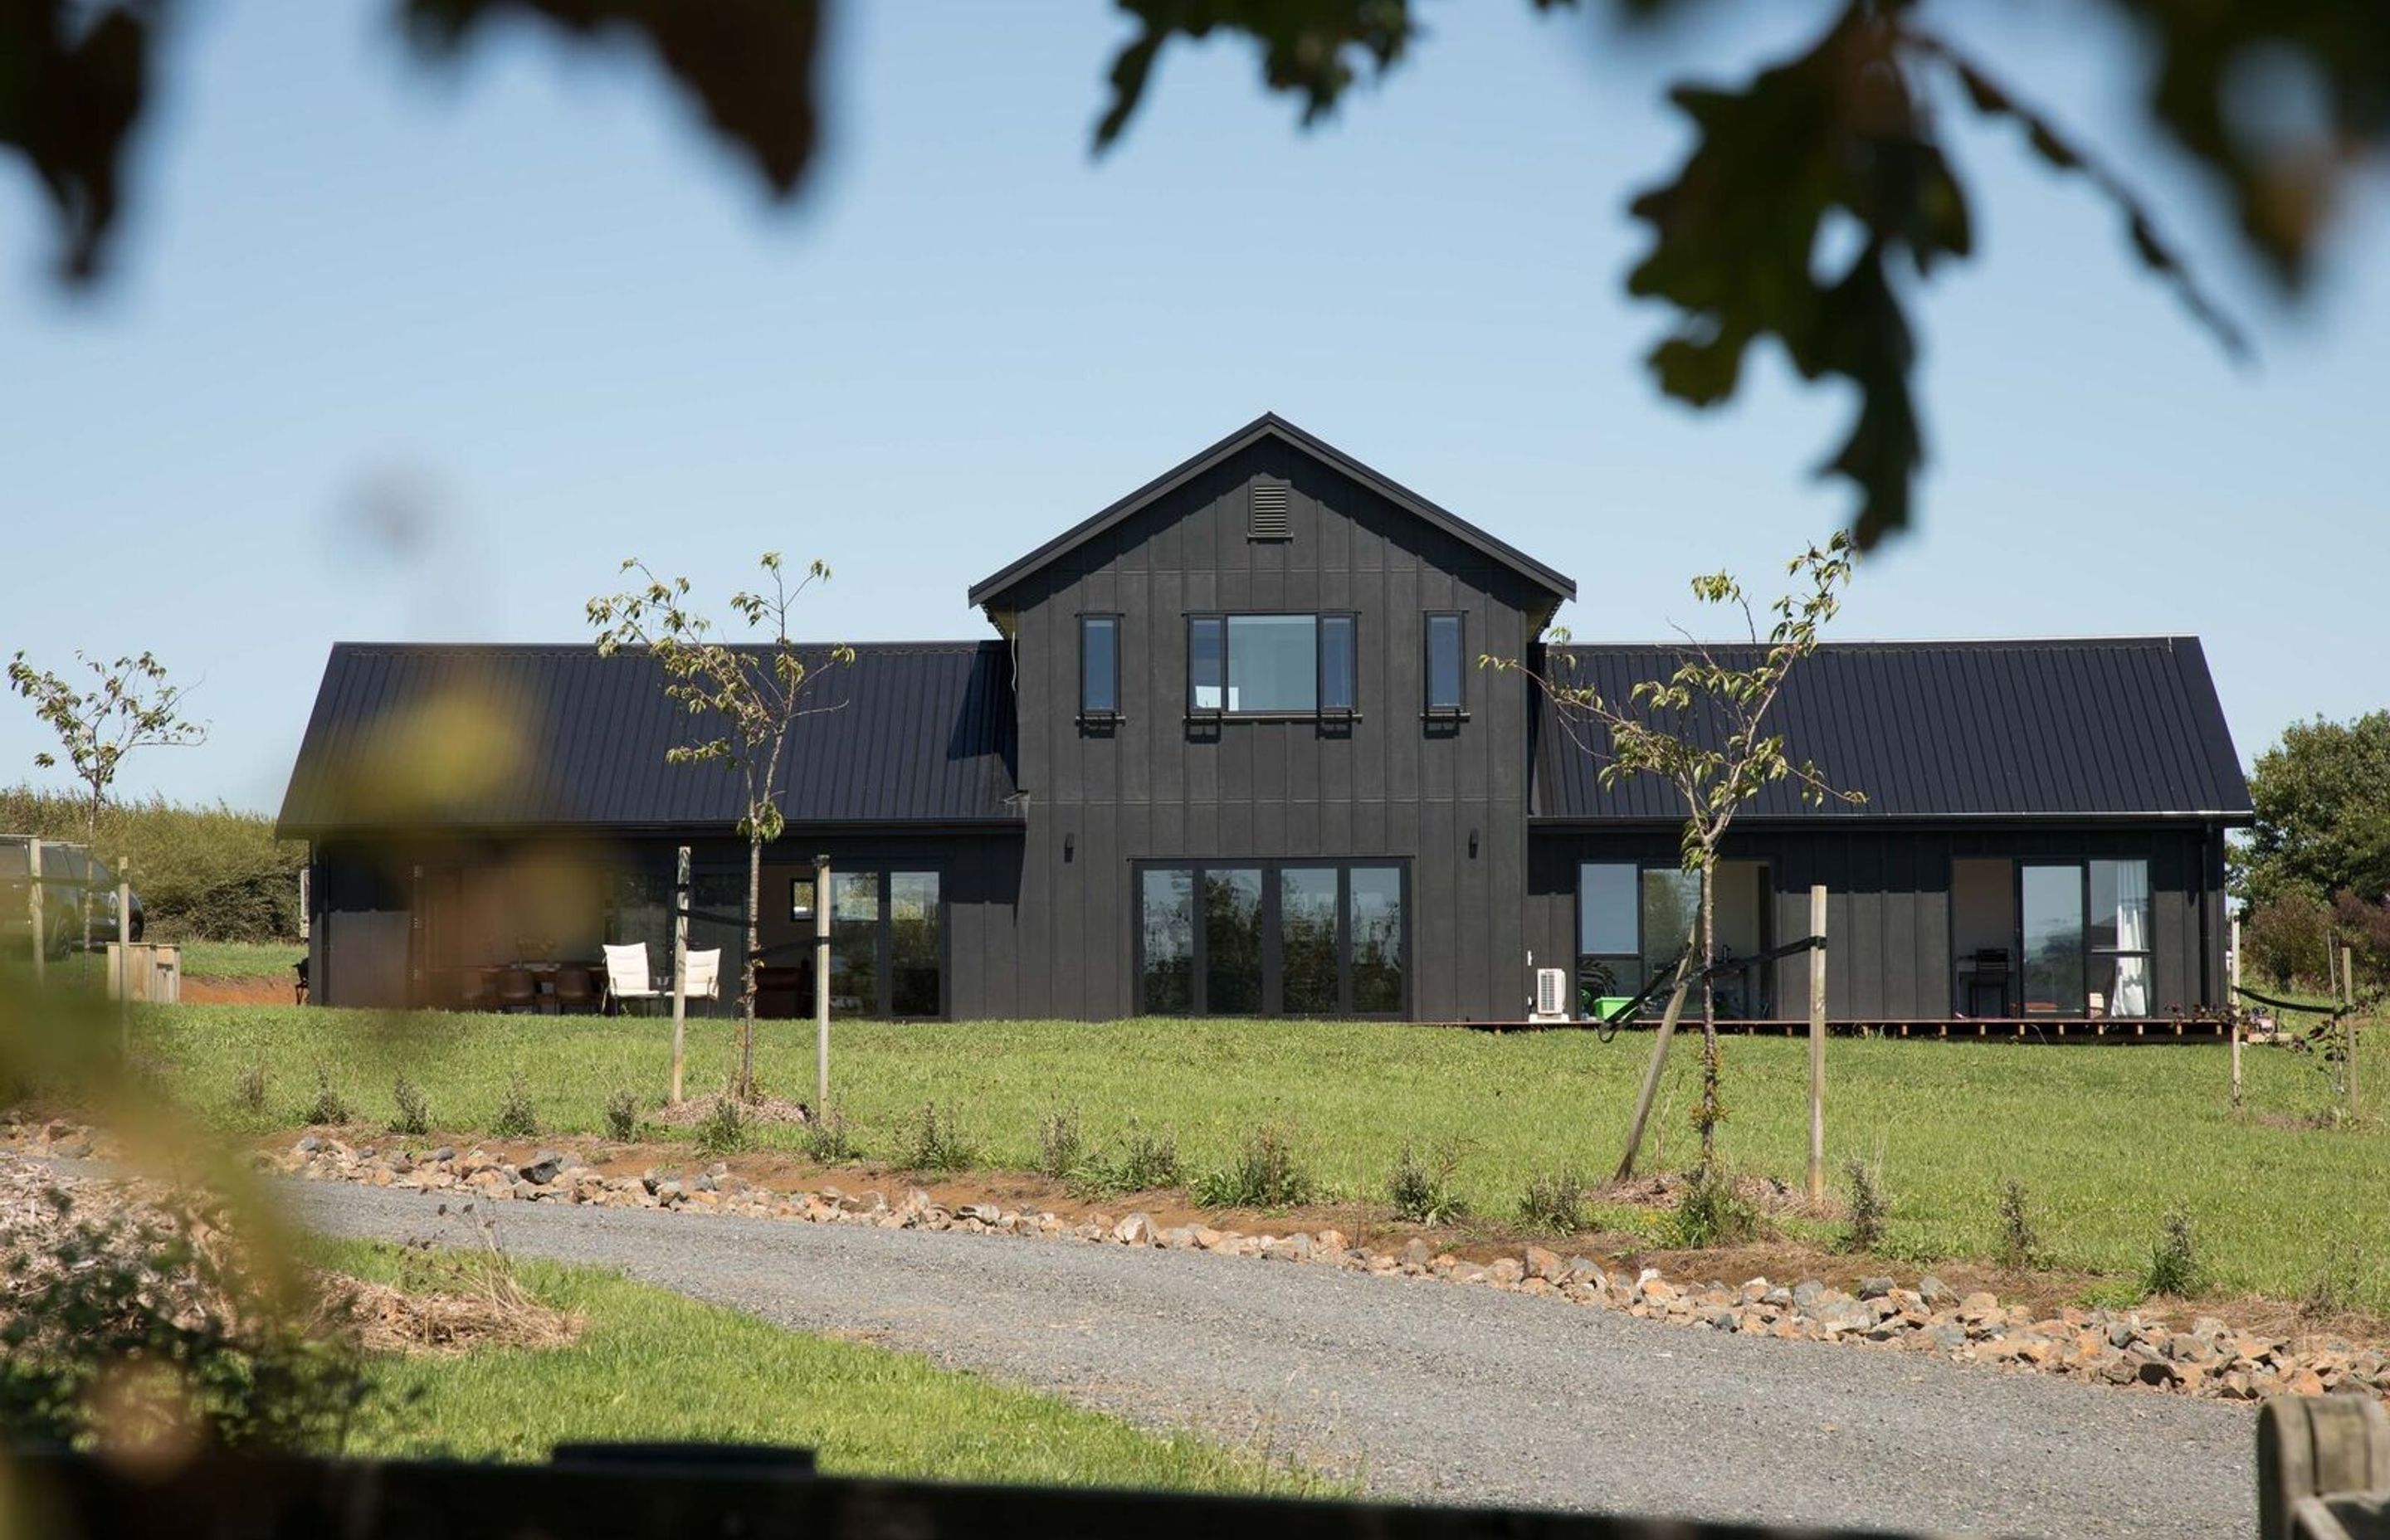 From single-storey coastal retreats, to two-storey contemporary homes, Customkit Buildings helps to design and manufacture barn-style buildings.